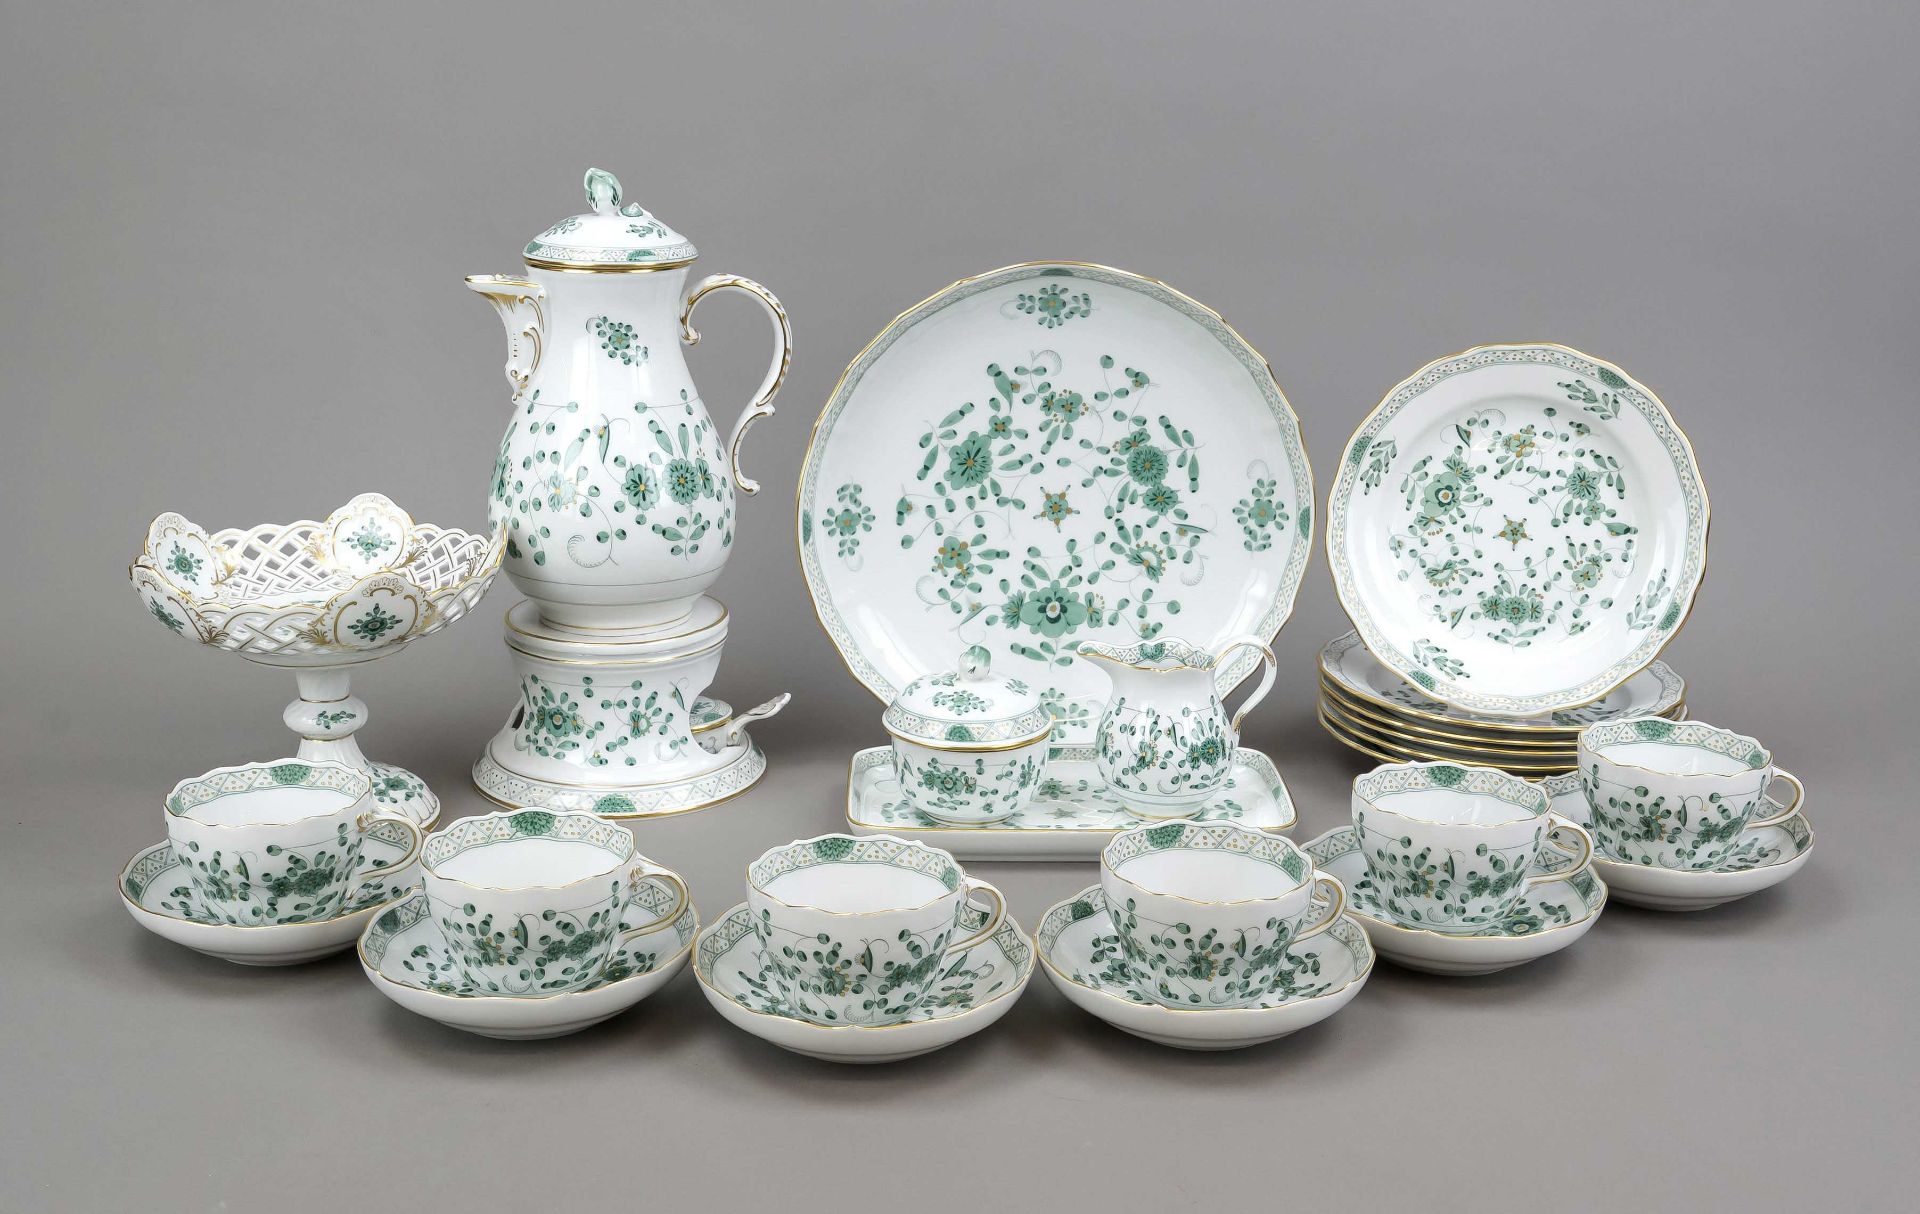 Coffee service for 6 persons, 25-piece, Meissen, marks mostly 1972-80, 1st choice, New Cut-out